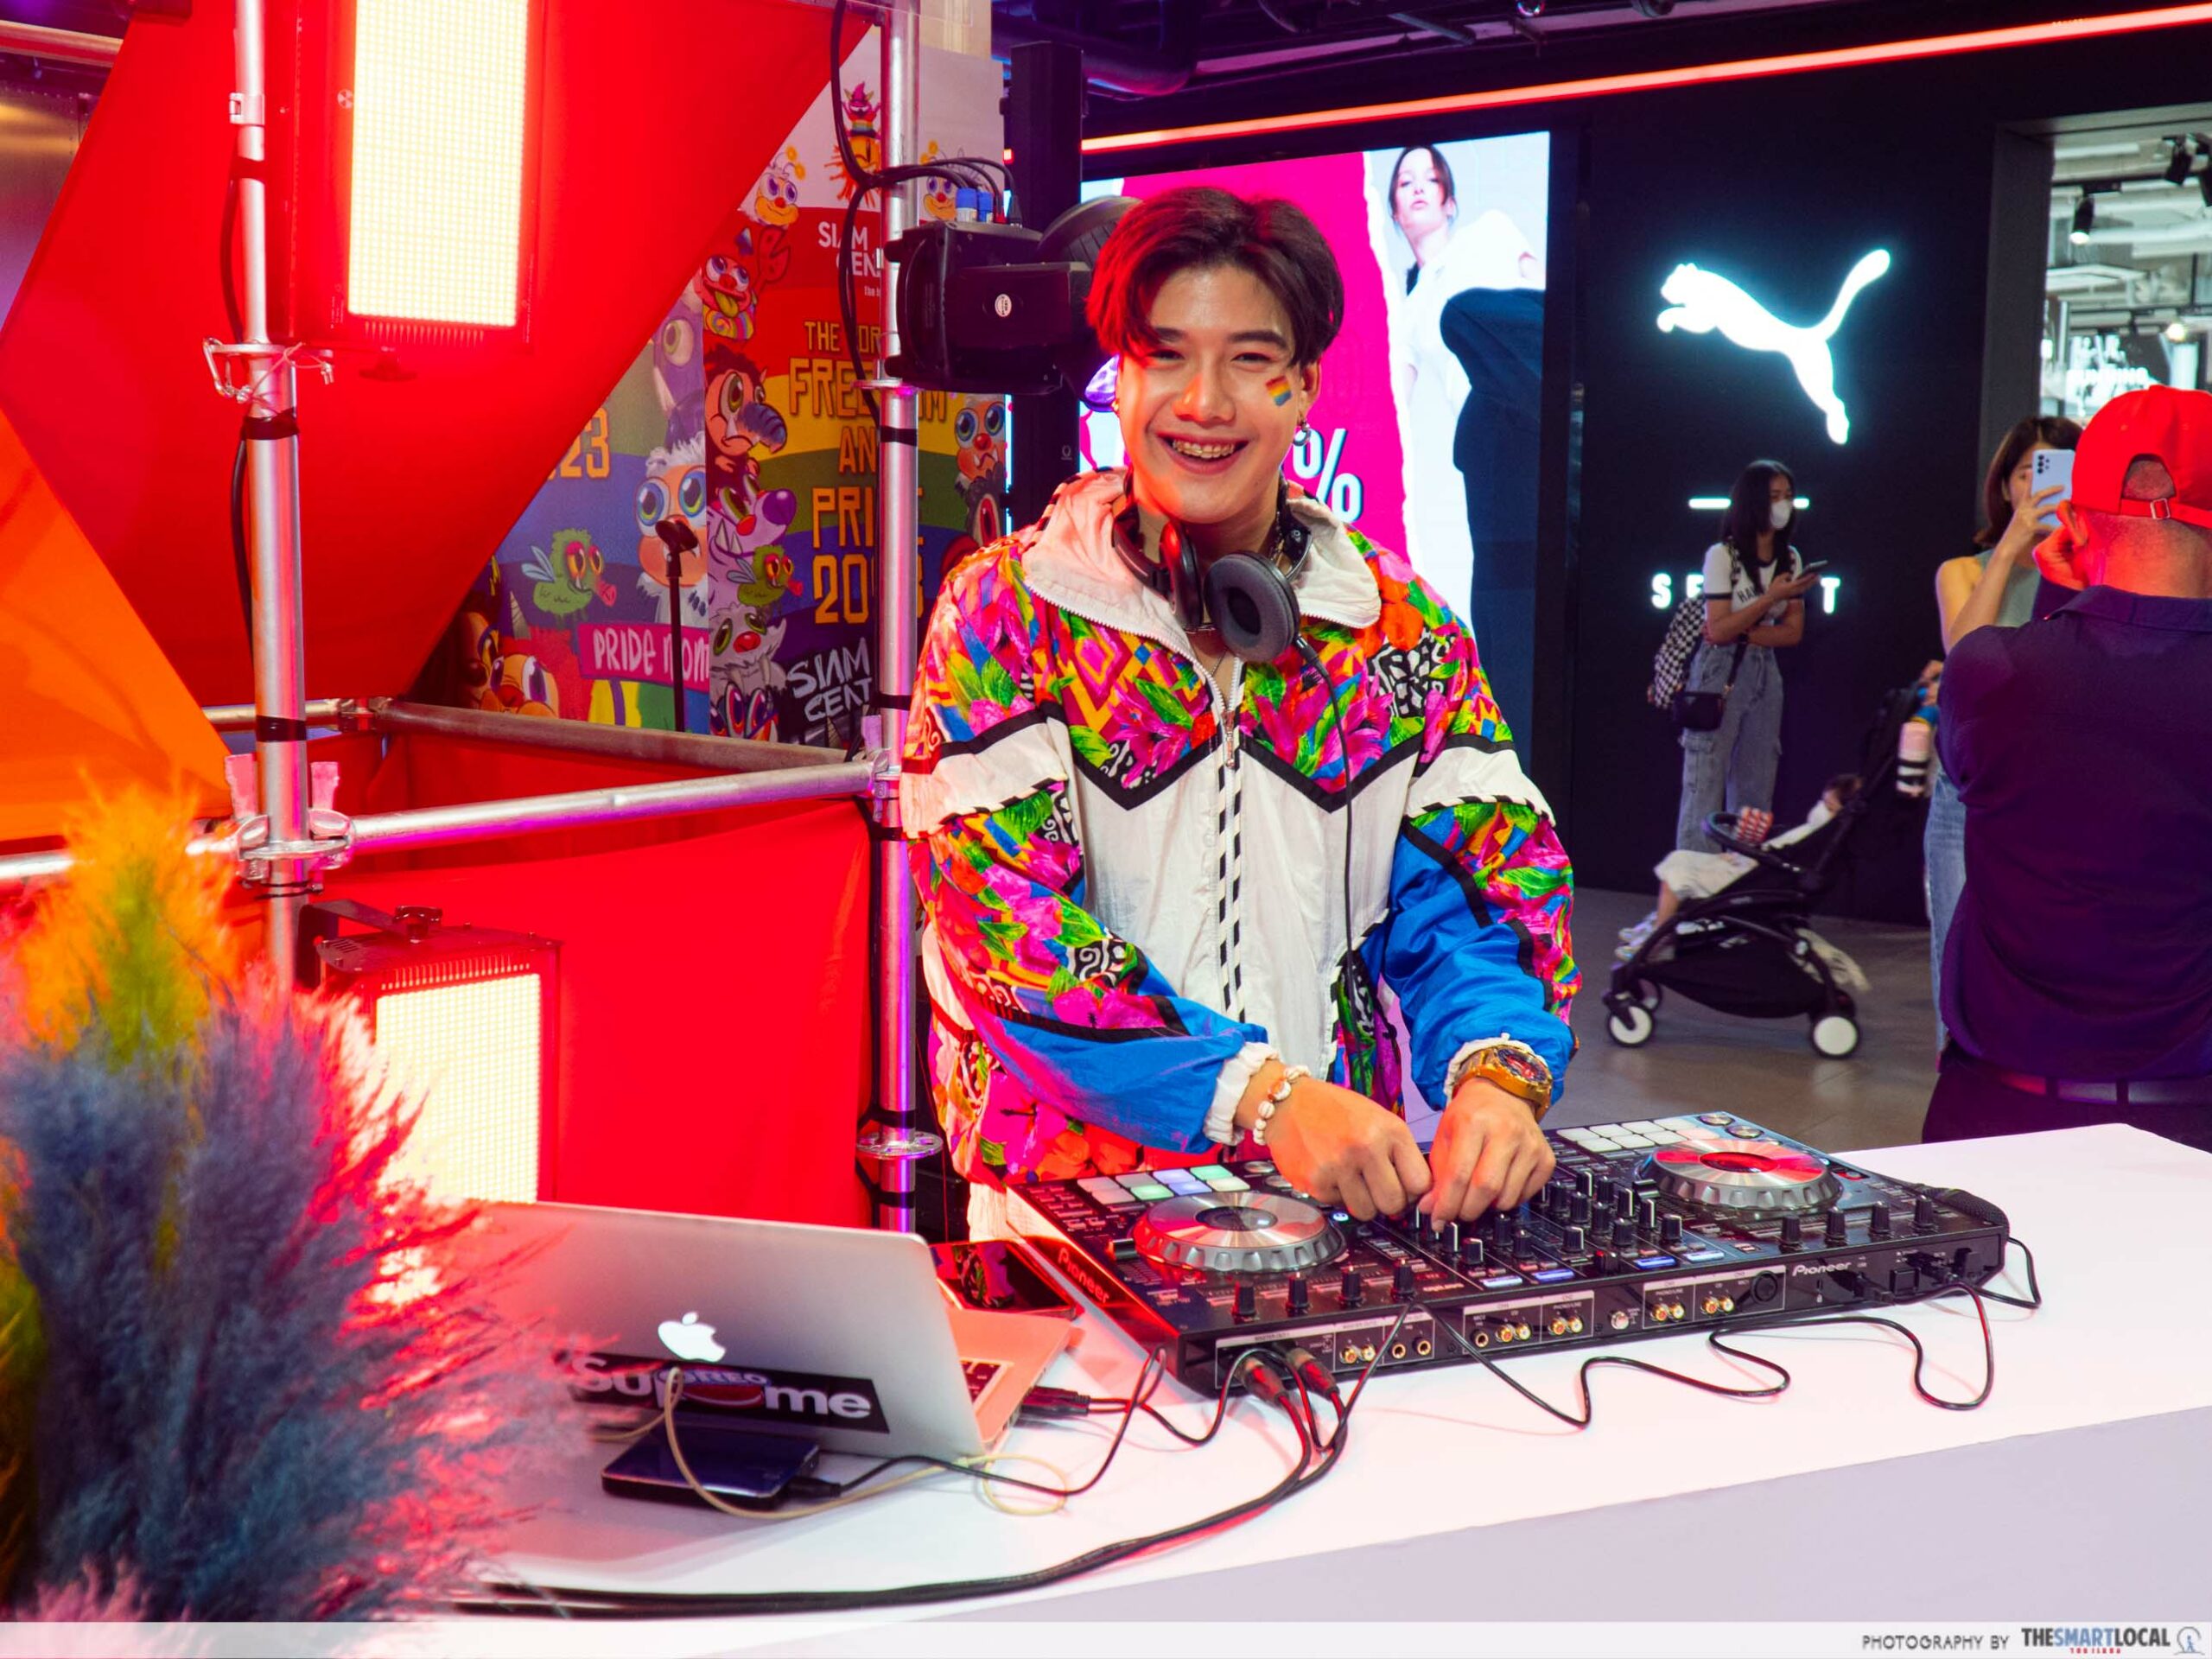 A DJ playing music at Siam Center during the Pride Parade